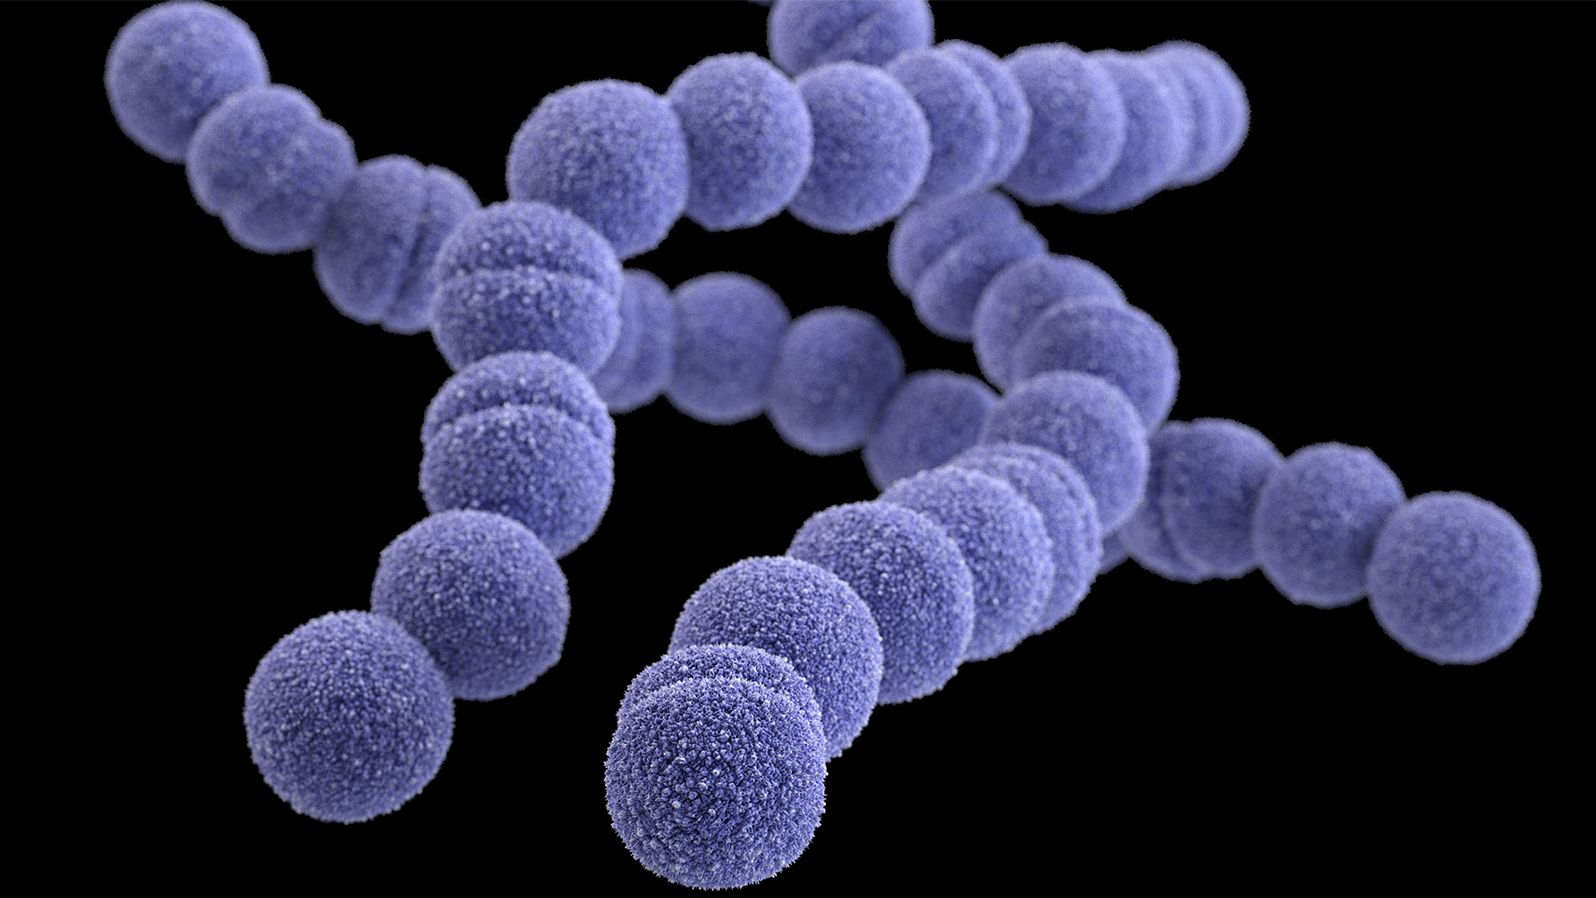 Group A Streptococcus infections are rising in the UK, having so far caused 6 deaths in children under the age of 10.